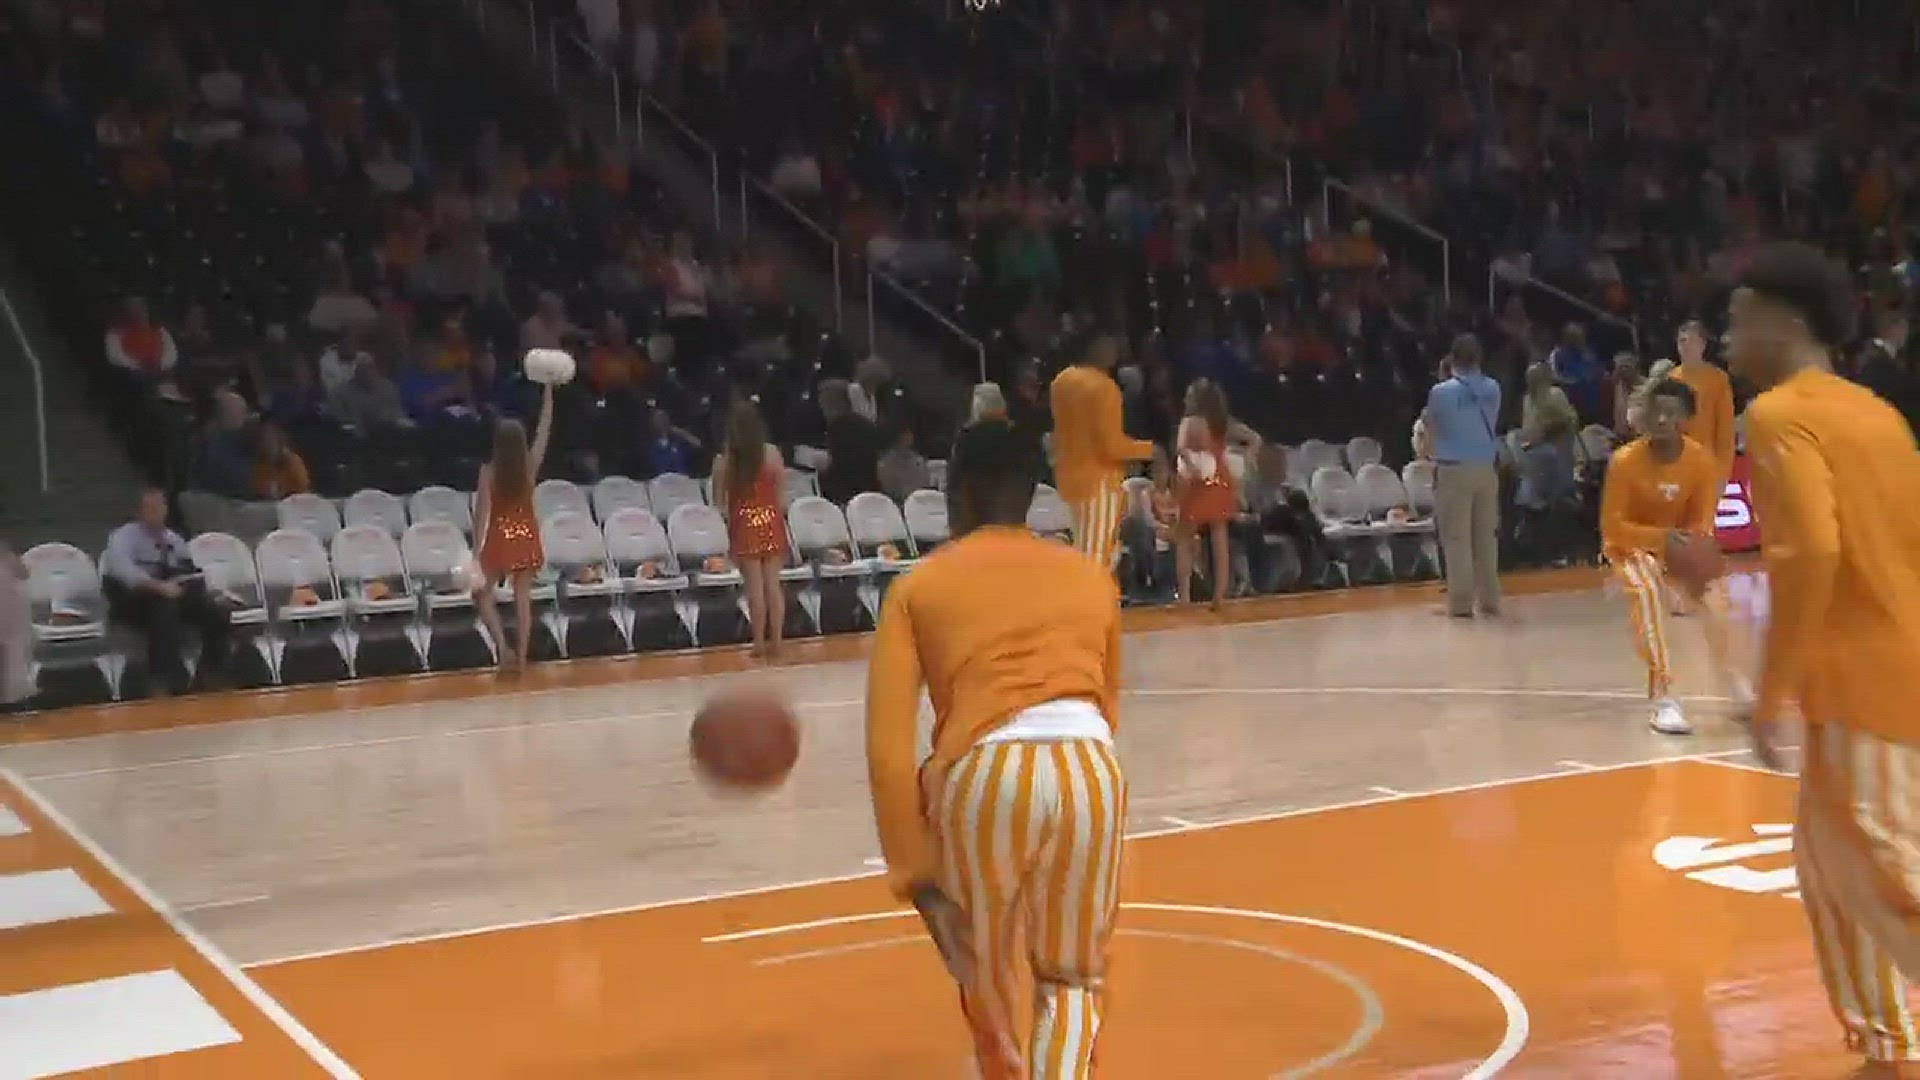 Kwe Parker only played three minutes for the Vols on Tuesday, but his pregame dunks are a spectacle to behold.